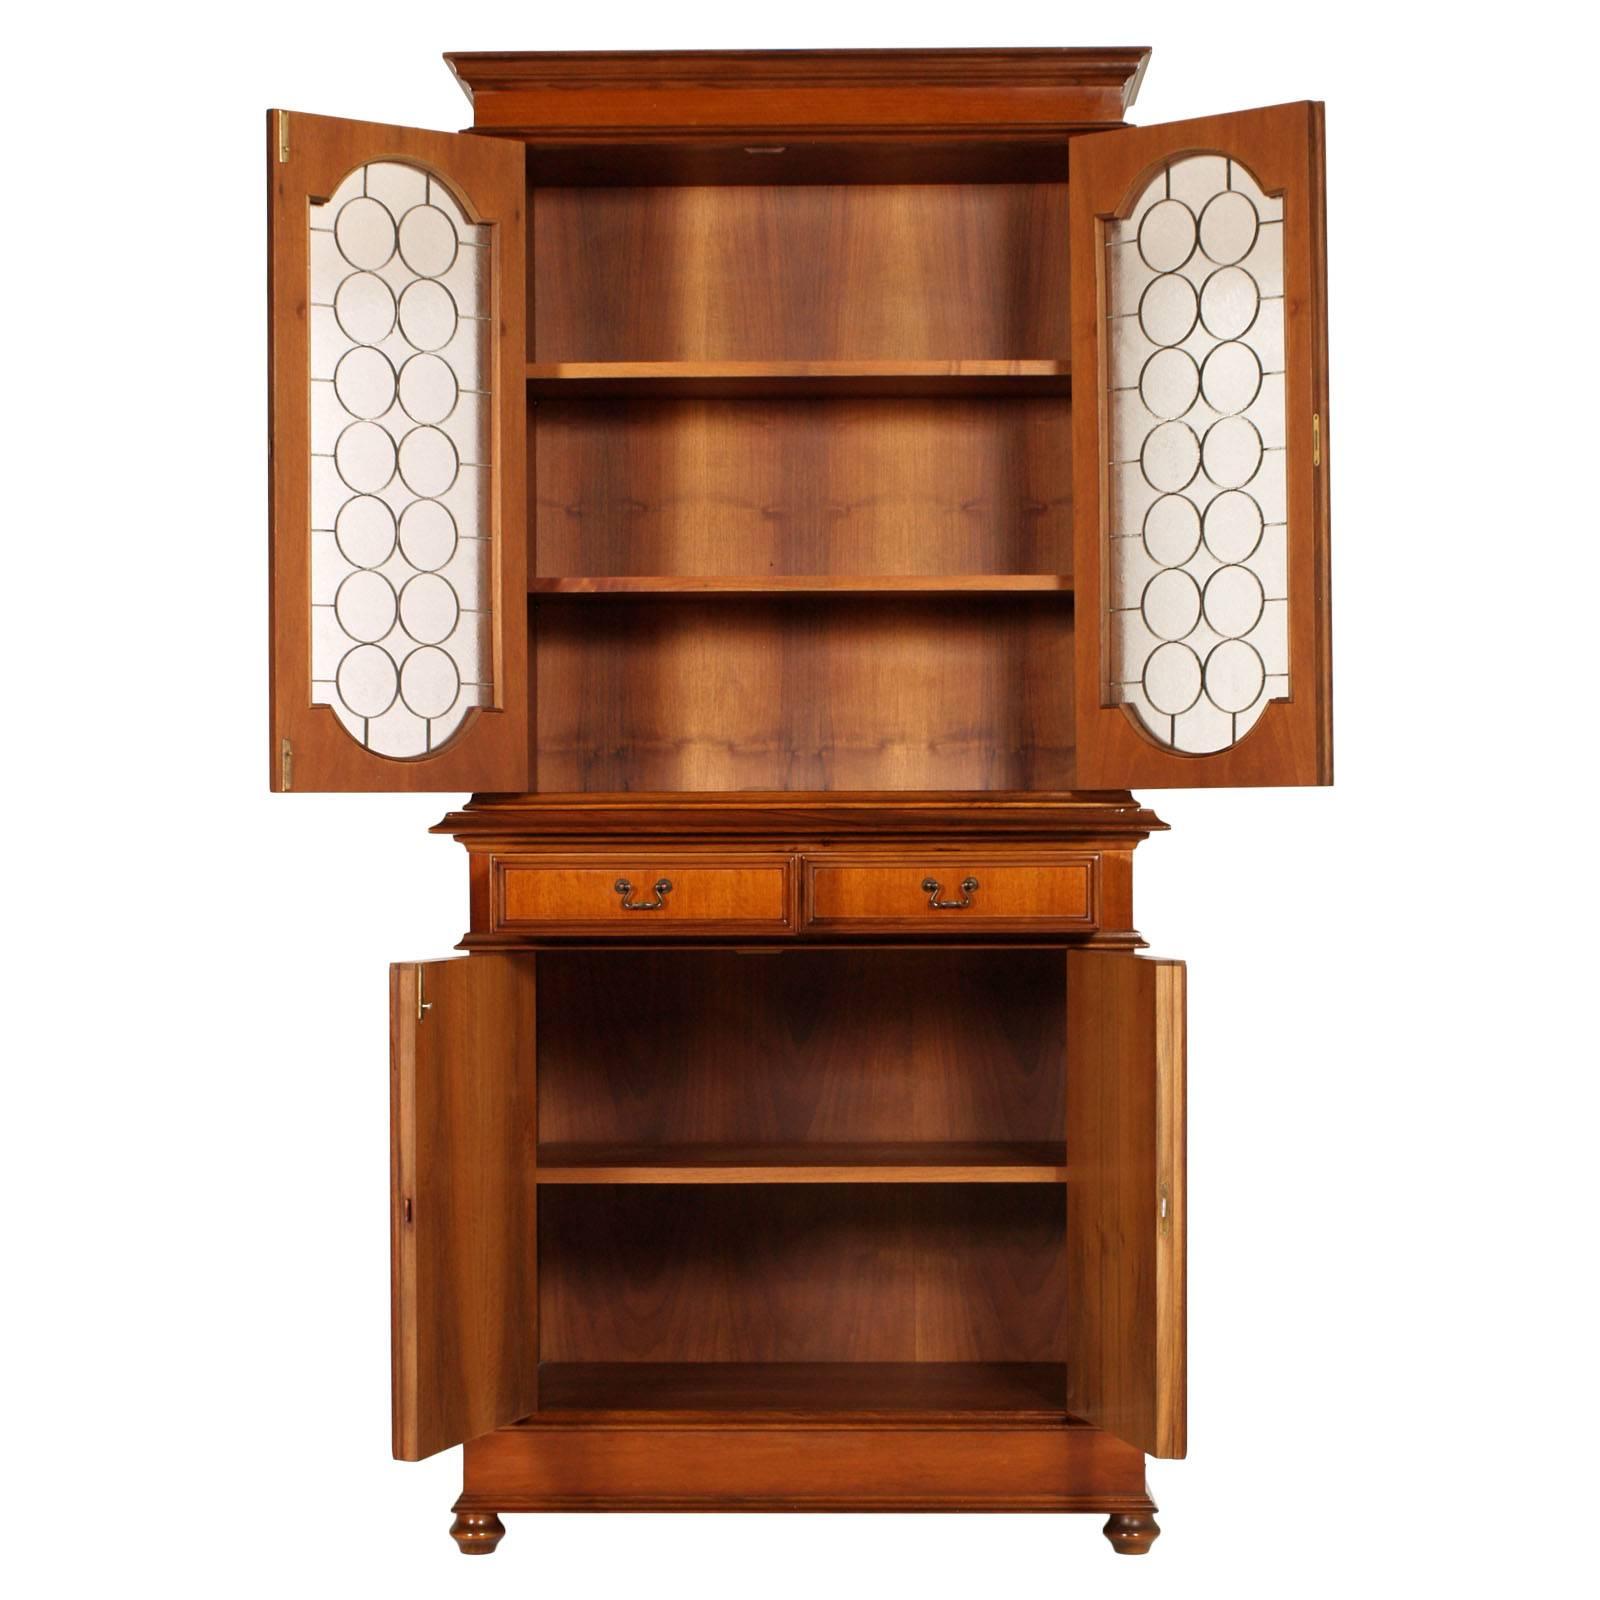 Italian bookcase period 1930s in walnut and walnut veneer with two drawers, wax polished. Upper showcase with grating and the two lower doors covered in leatherette.
Excellent conditions.

Measures cm: H 106/206, W 102, D 50.